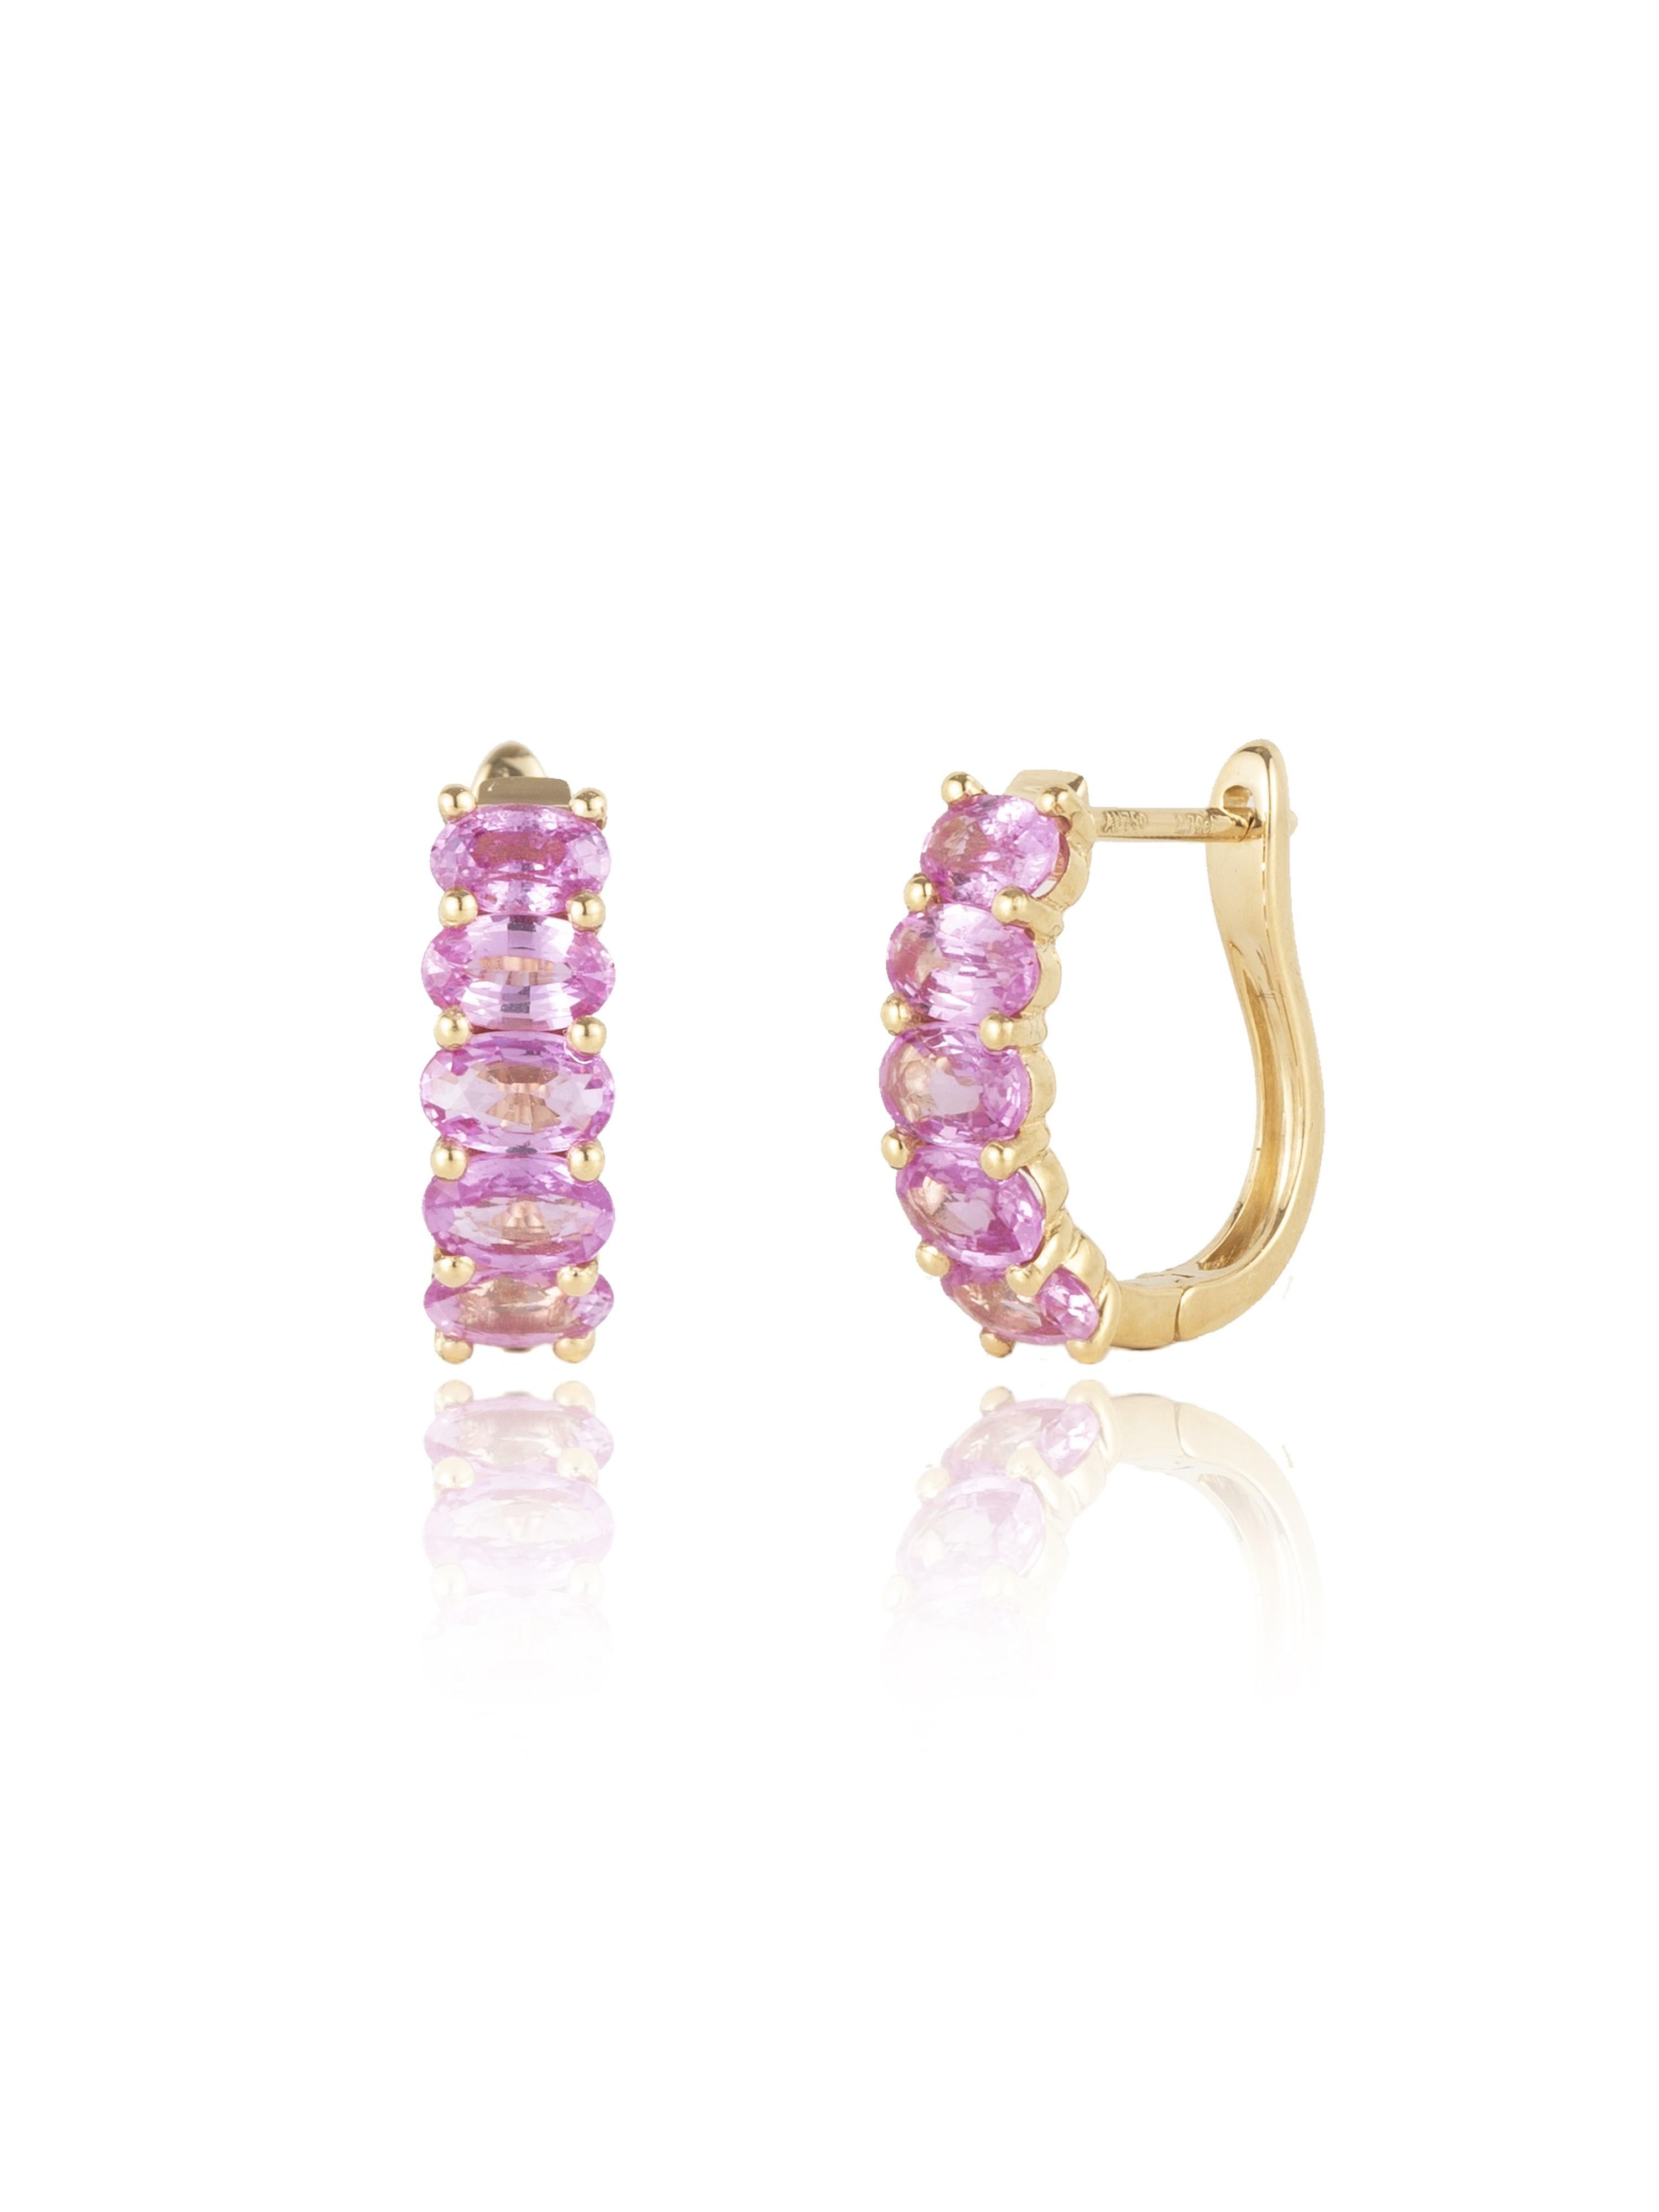 Discover Nina Zhou Pink Sapphire Huggie Earrings with Baroque Pearl Enhancers in 18k Yellow Gold. These earrings blend the serene glow of Pearls with the timeless sparkle of pink sapphire, all cradled in a delicate, classic hoop design. Enhanced by